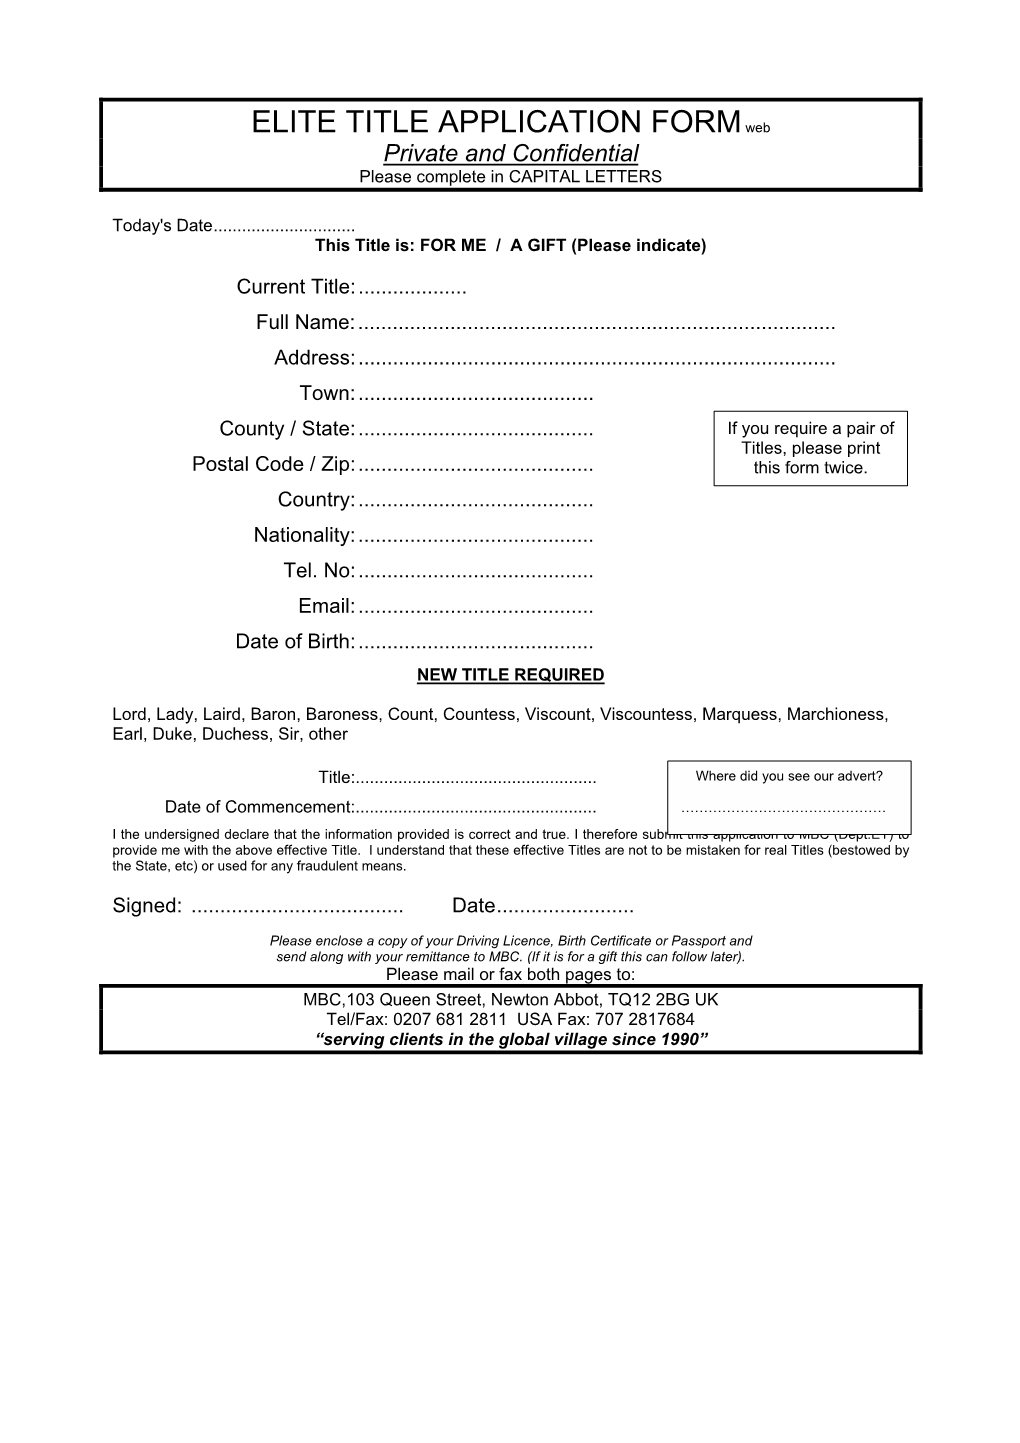 ELITE TITLE APPLICATION FORM Web Private and Confidential Please Complete in CAPITAL LETTERS